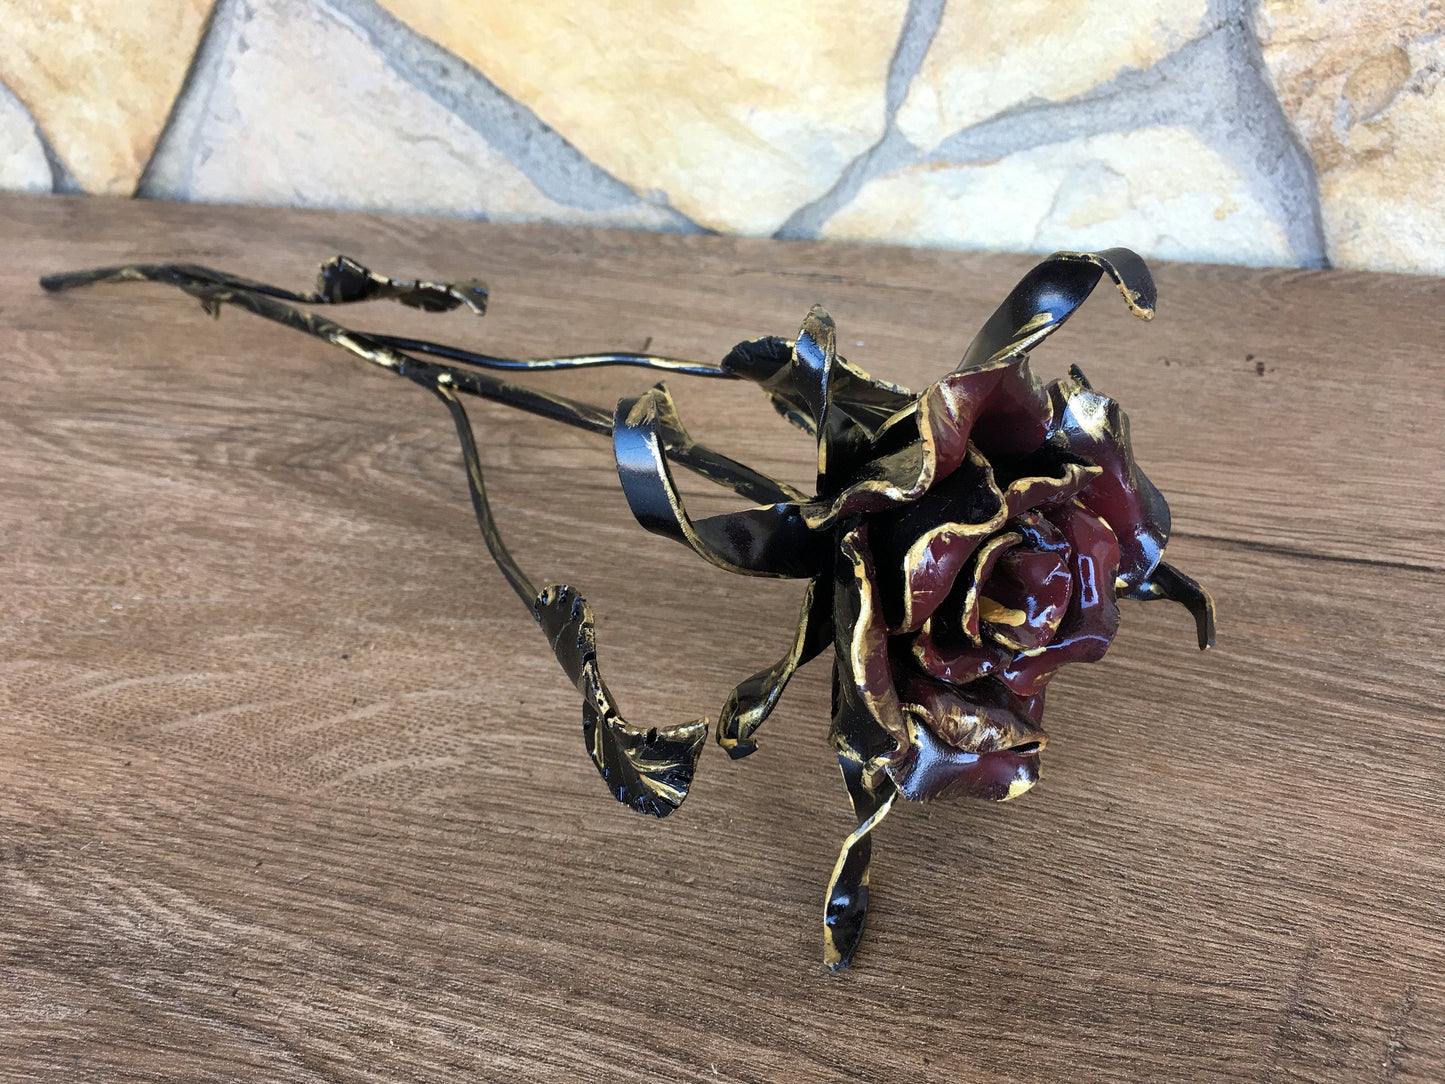 Iron rose, iron gift for her, iron anniversary gift, iron gifts, Mother's day gift, iron flower, hand forged flower, hand forged rose